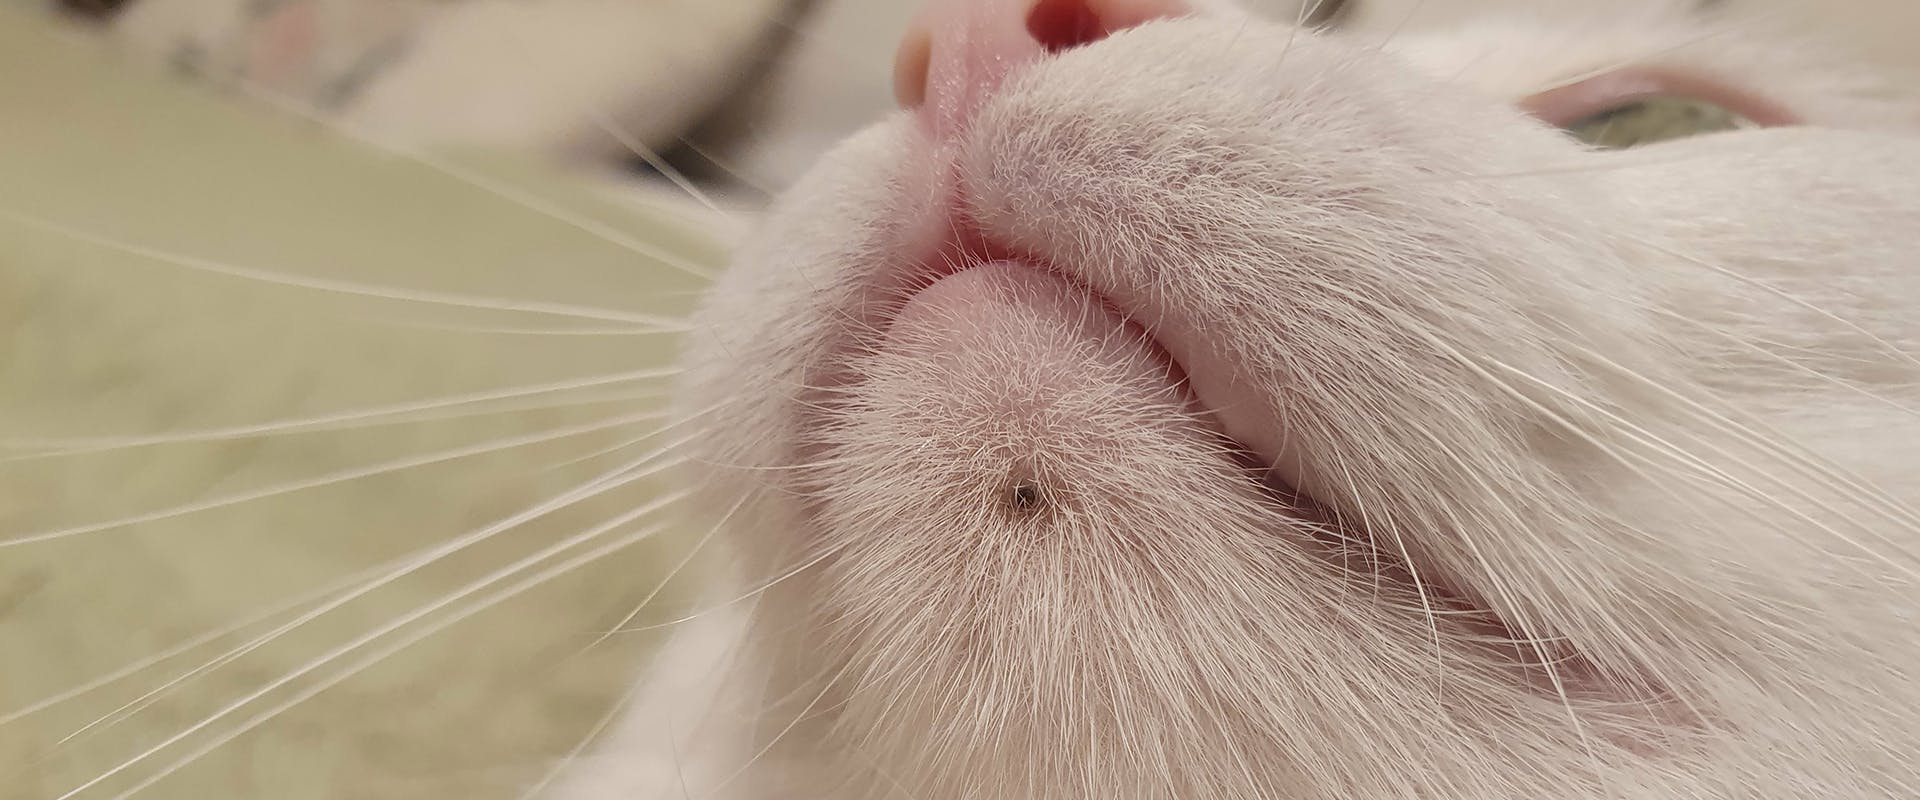 A cat with feline acne